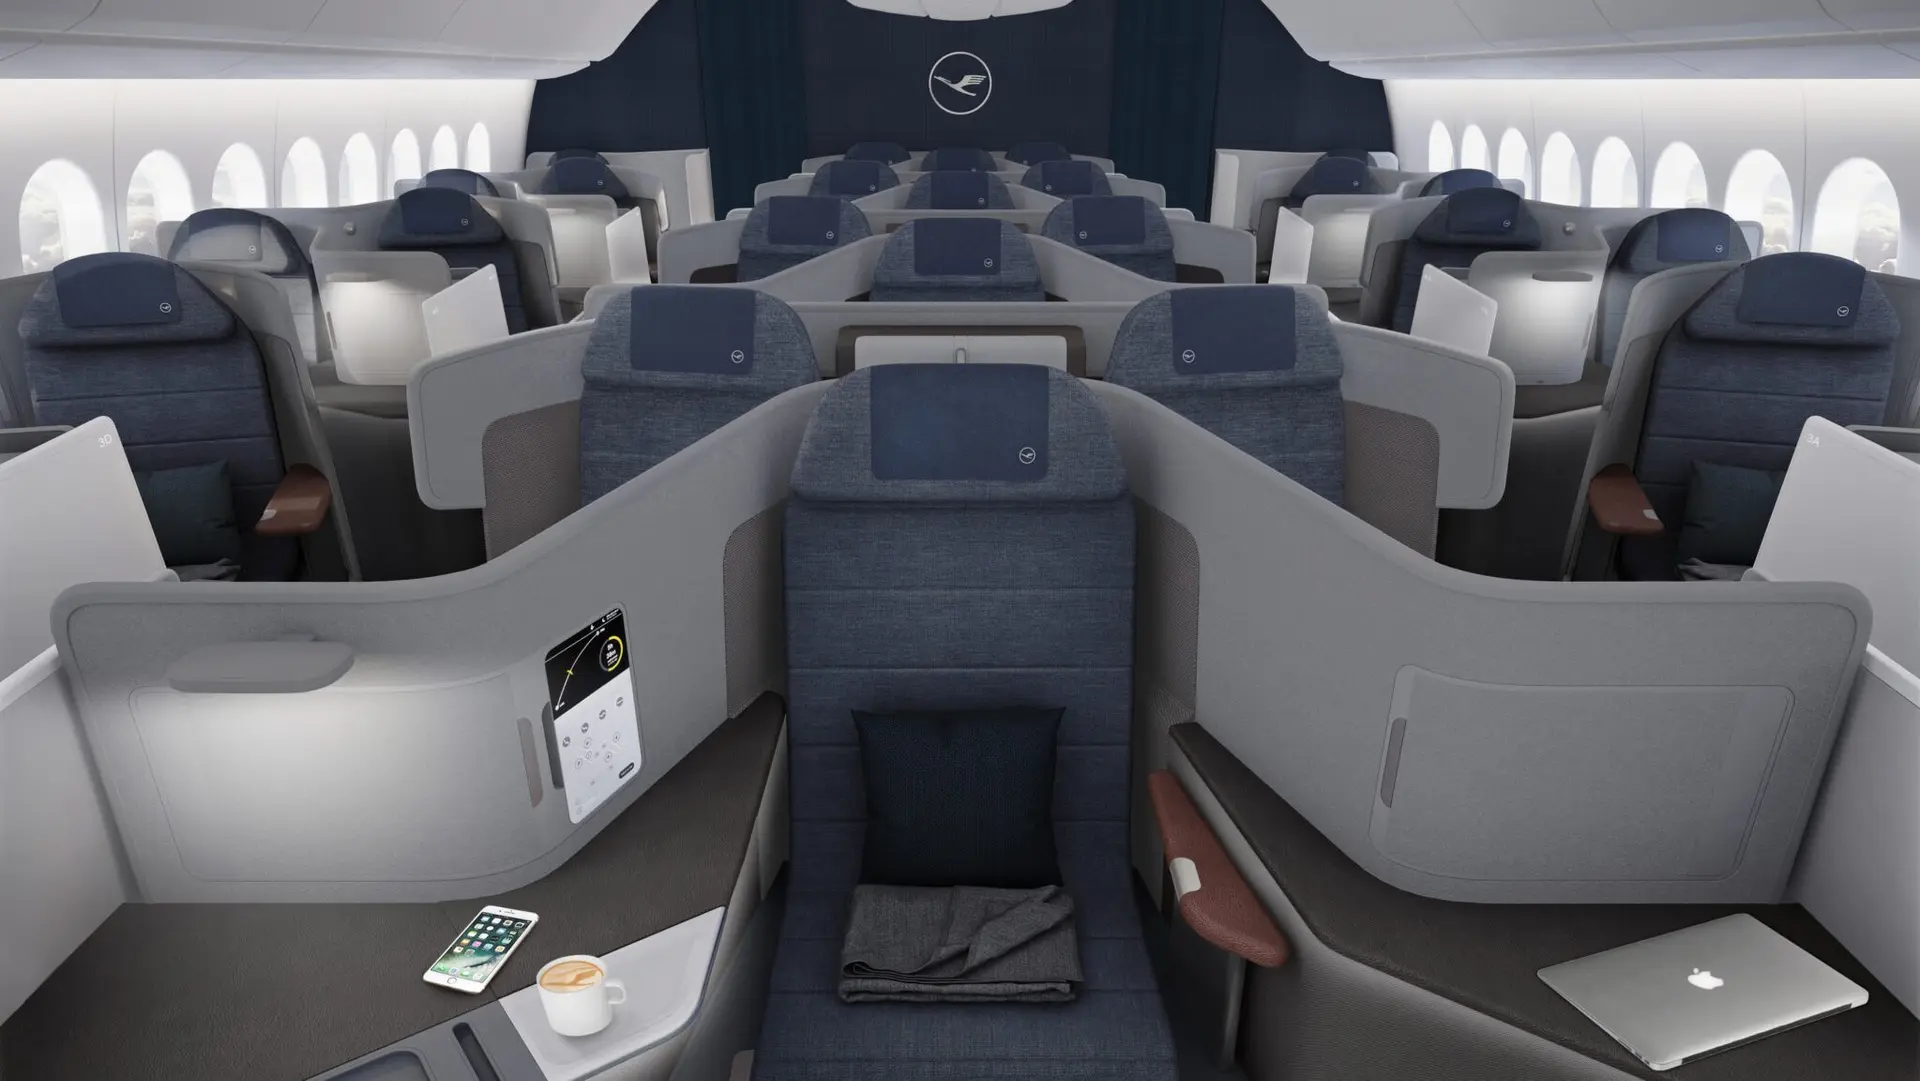 Airlines News - Lufthansa upgrades its Business Class product & orders new aircraft